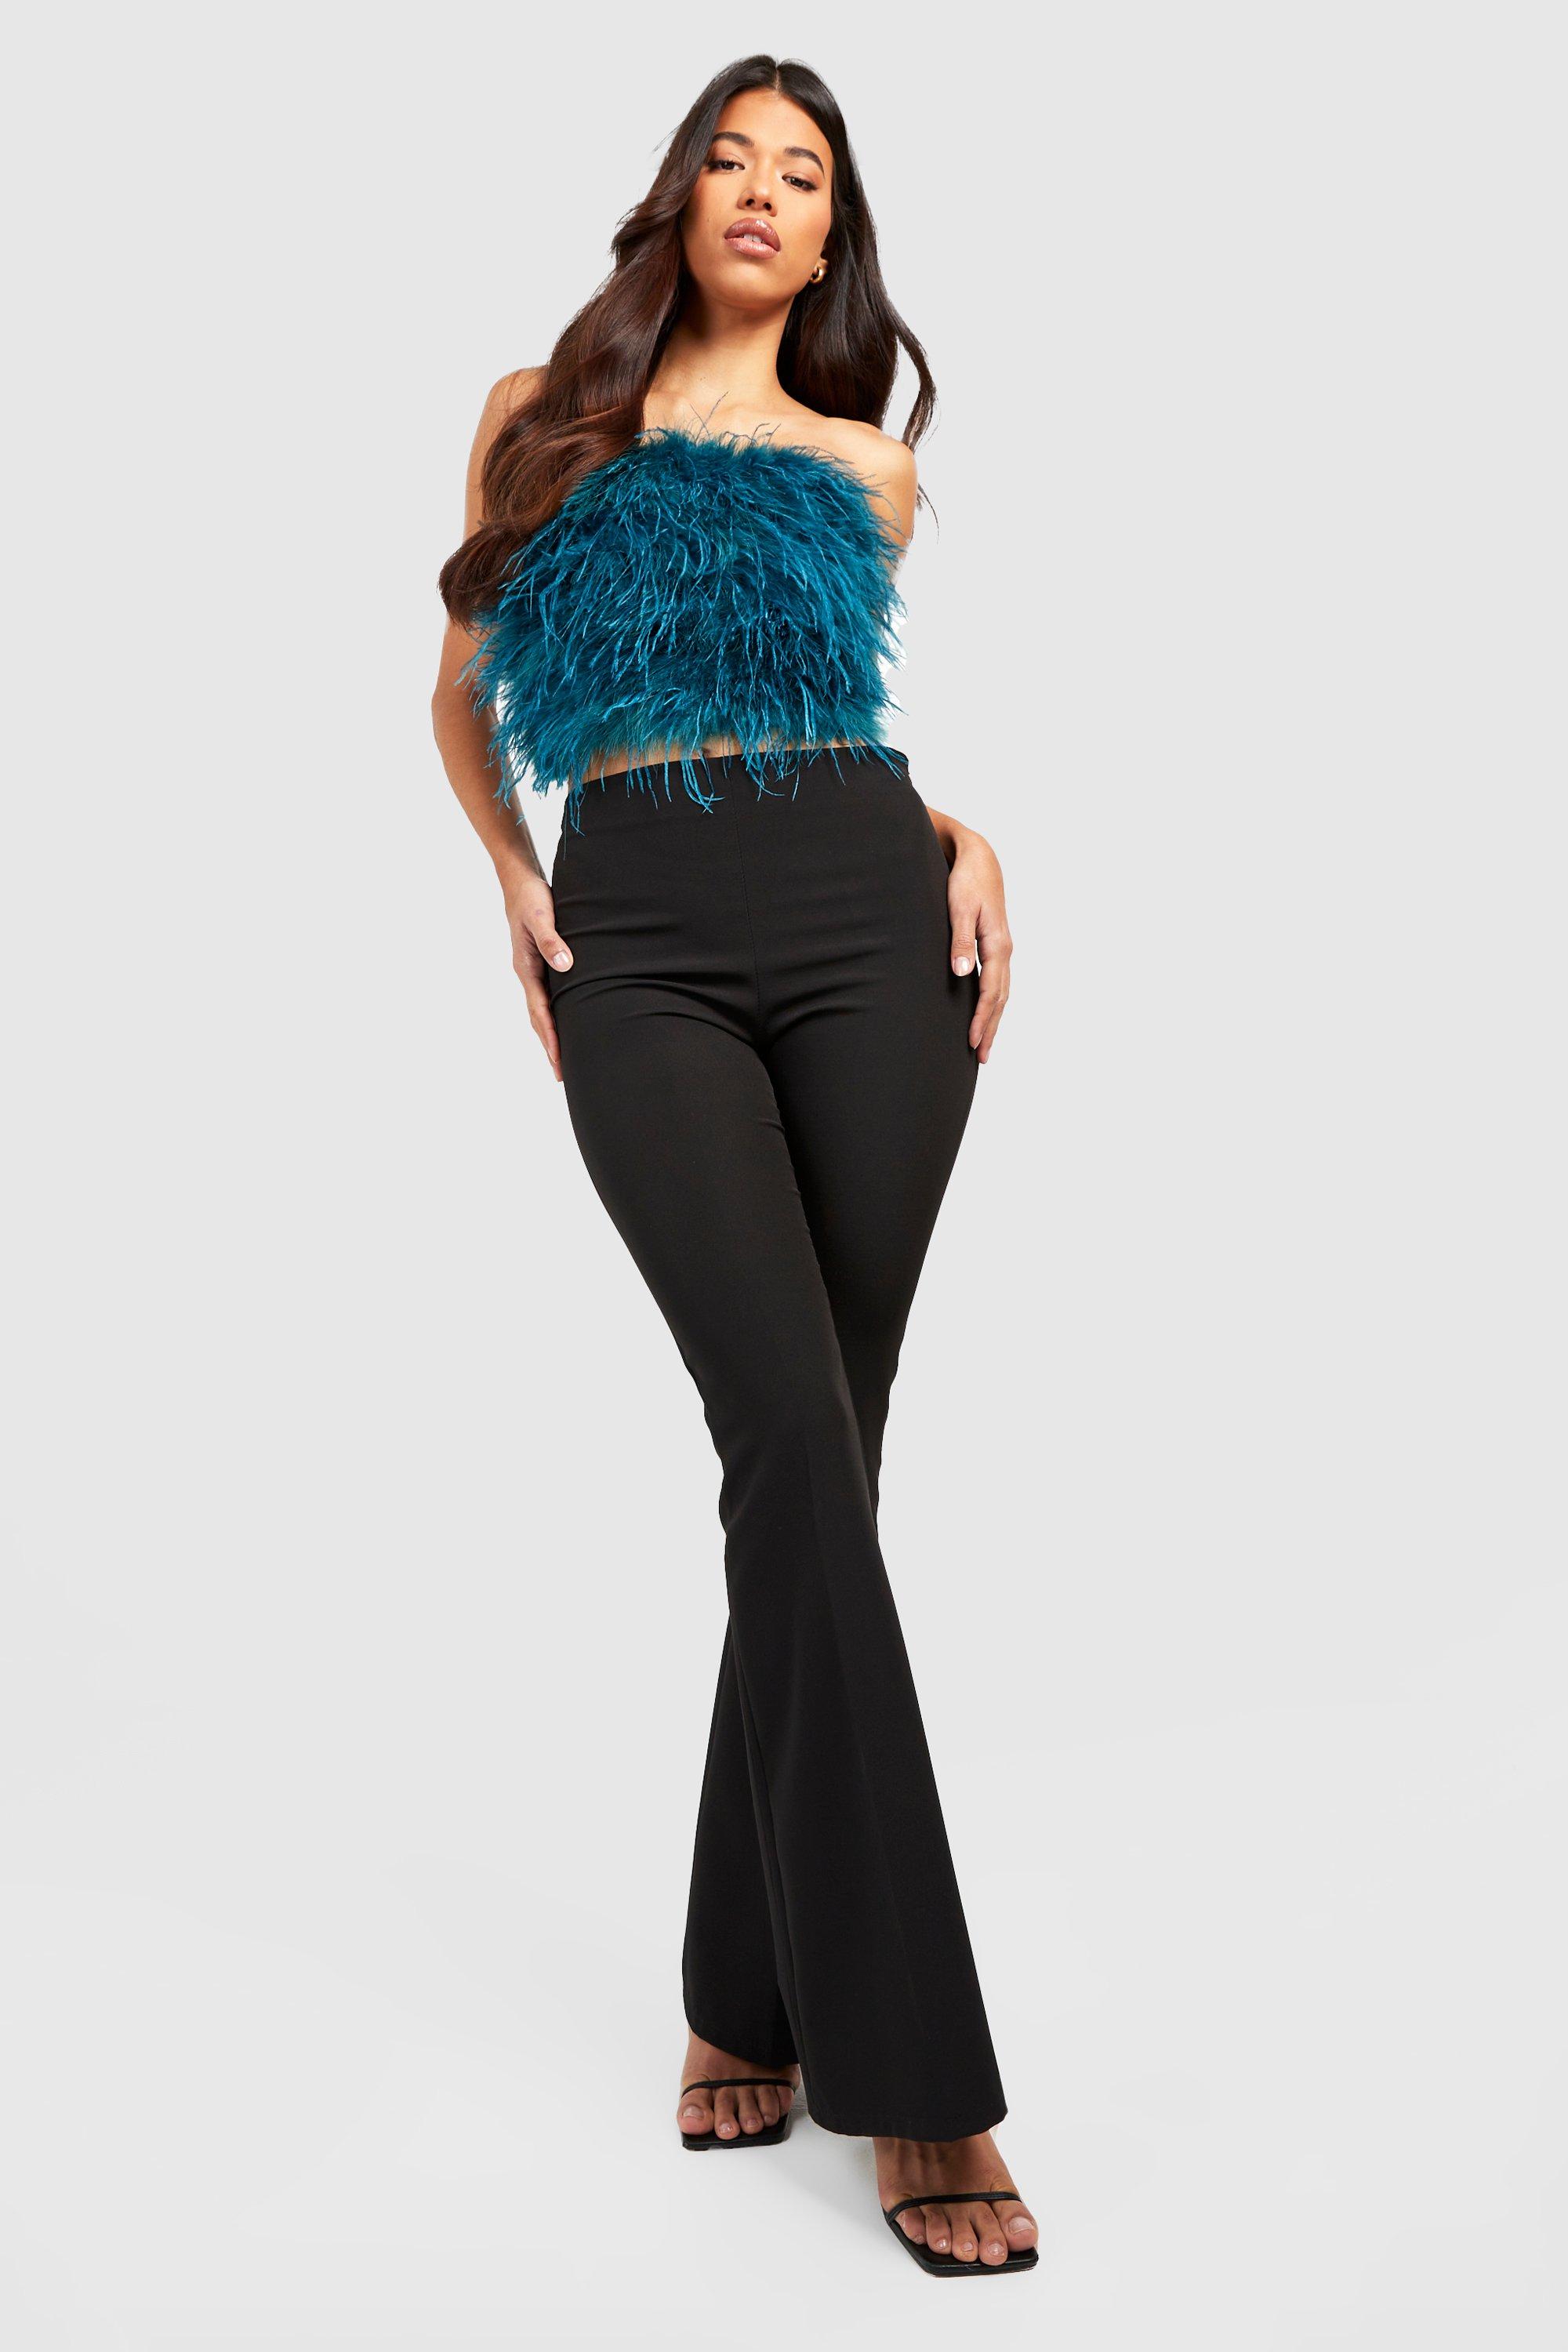 Feather Bandeau Corset Top- Buy Fashion Wholesale in The UK